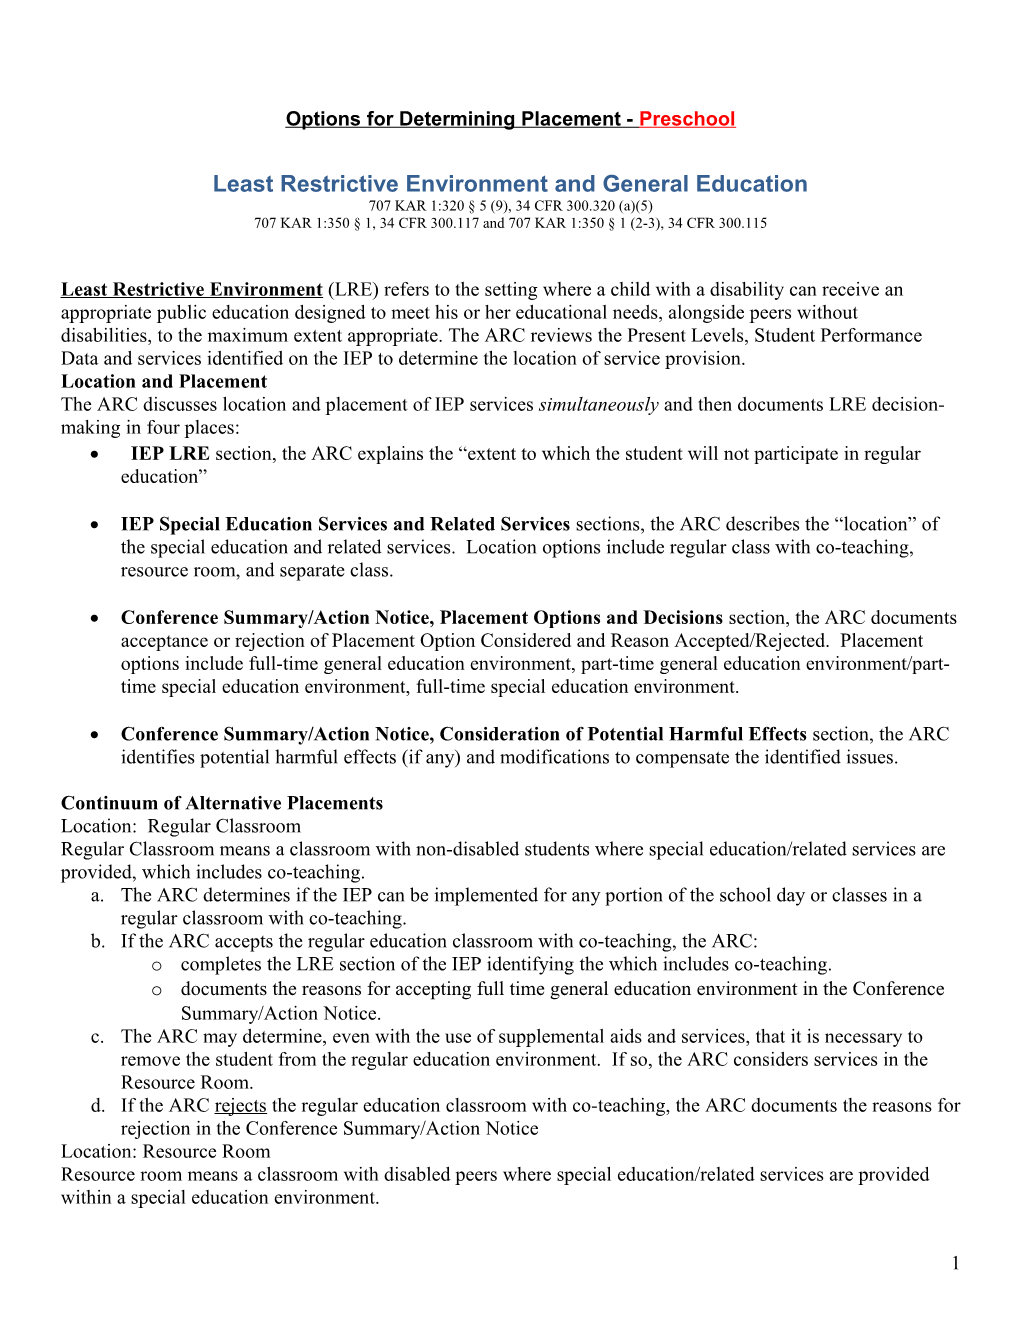 Least Restrictive Environment and General Education